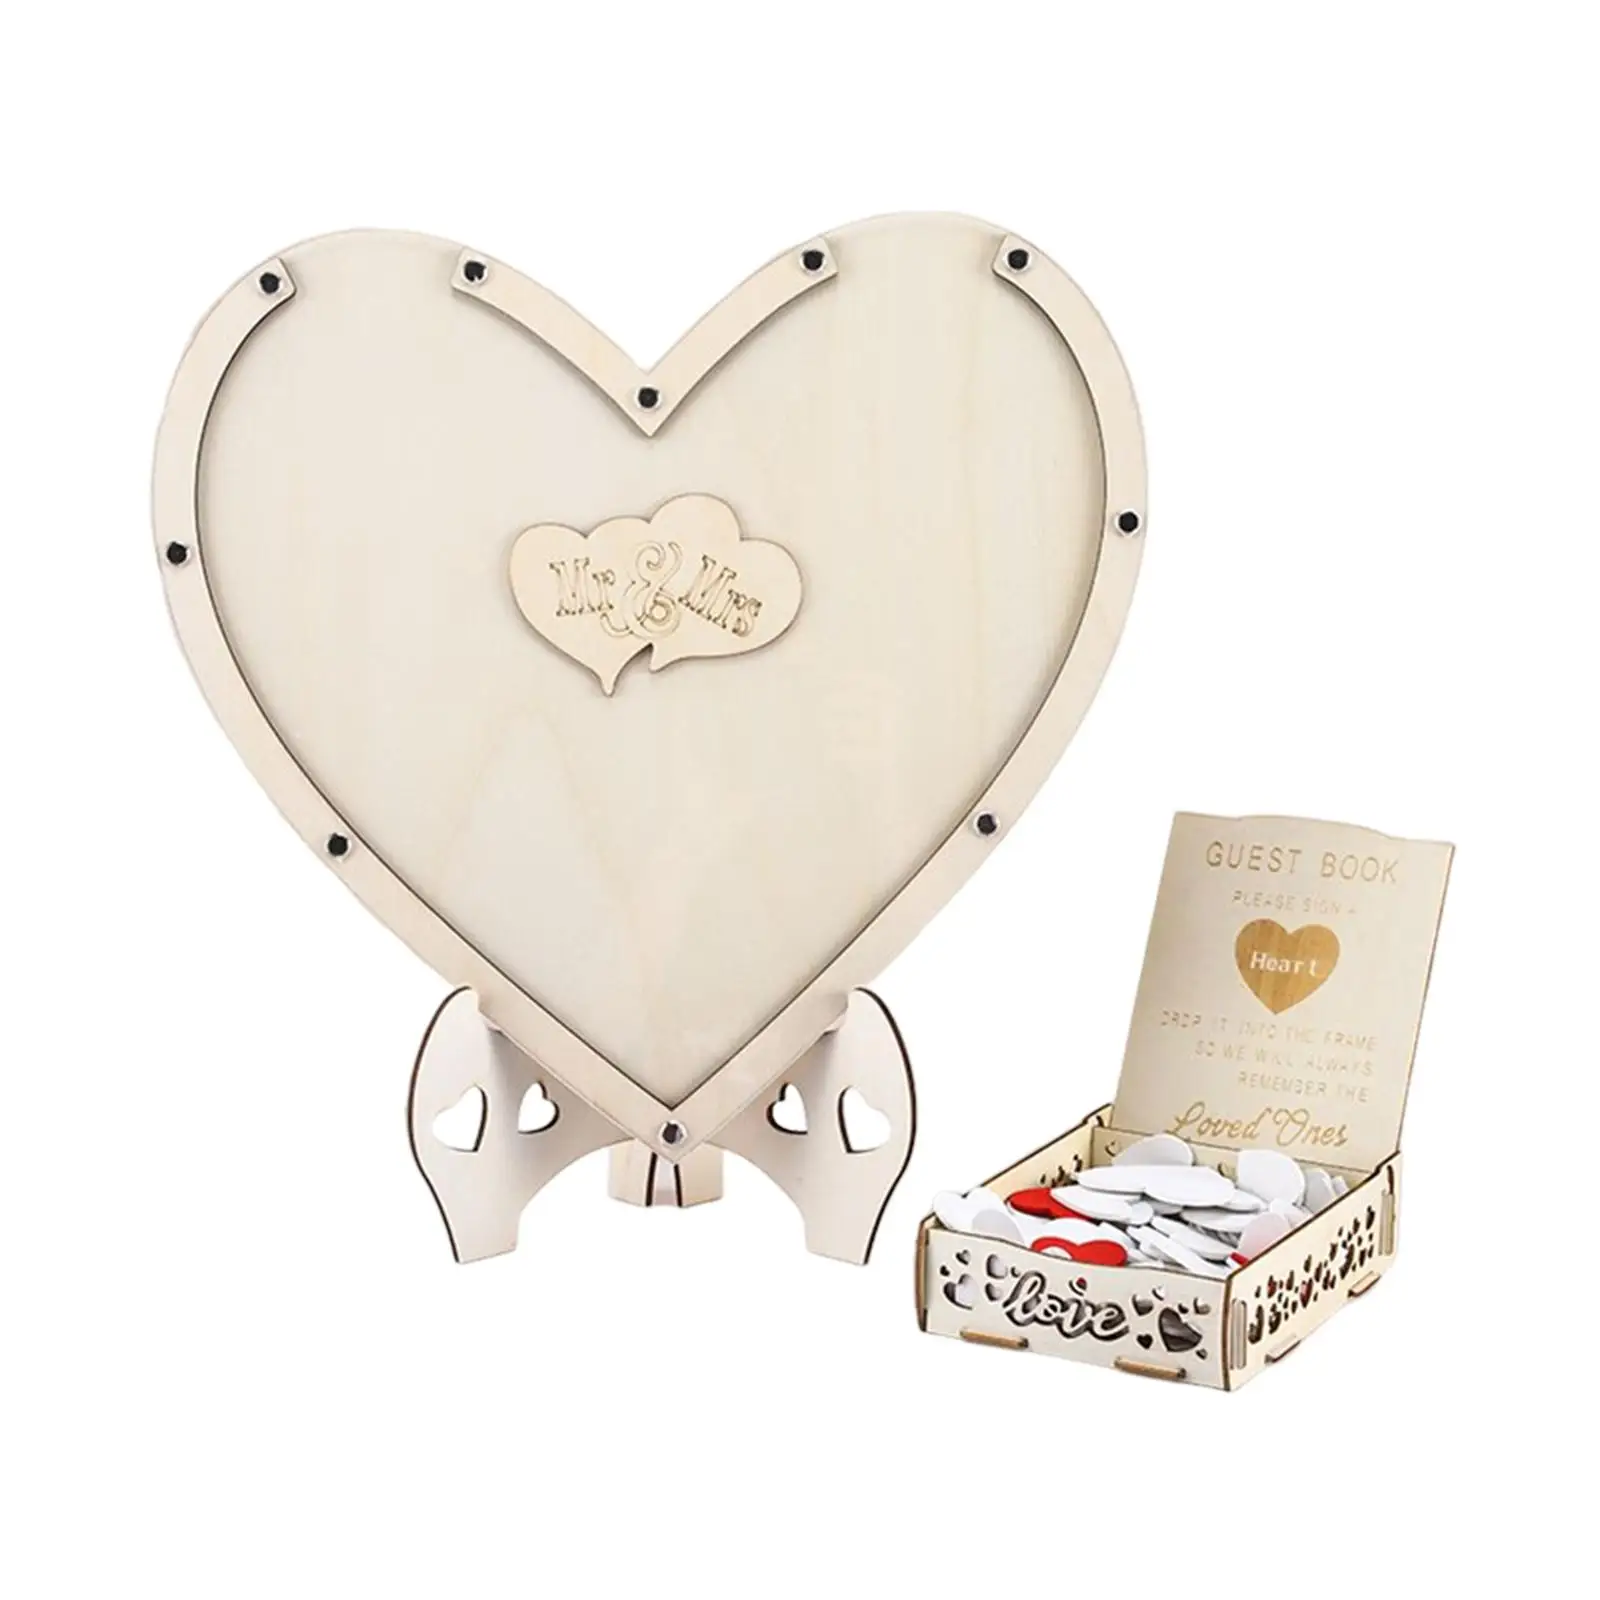 Wooden 3D Wedding Guest Book Heart Shaped Party Decoration 80 Wooden Hearts sign Container Drop Box Gift for Baby Shower